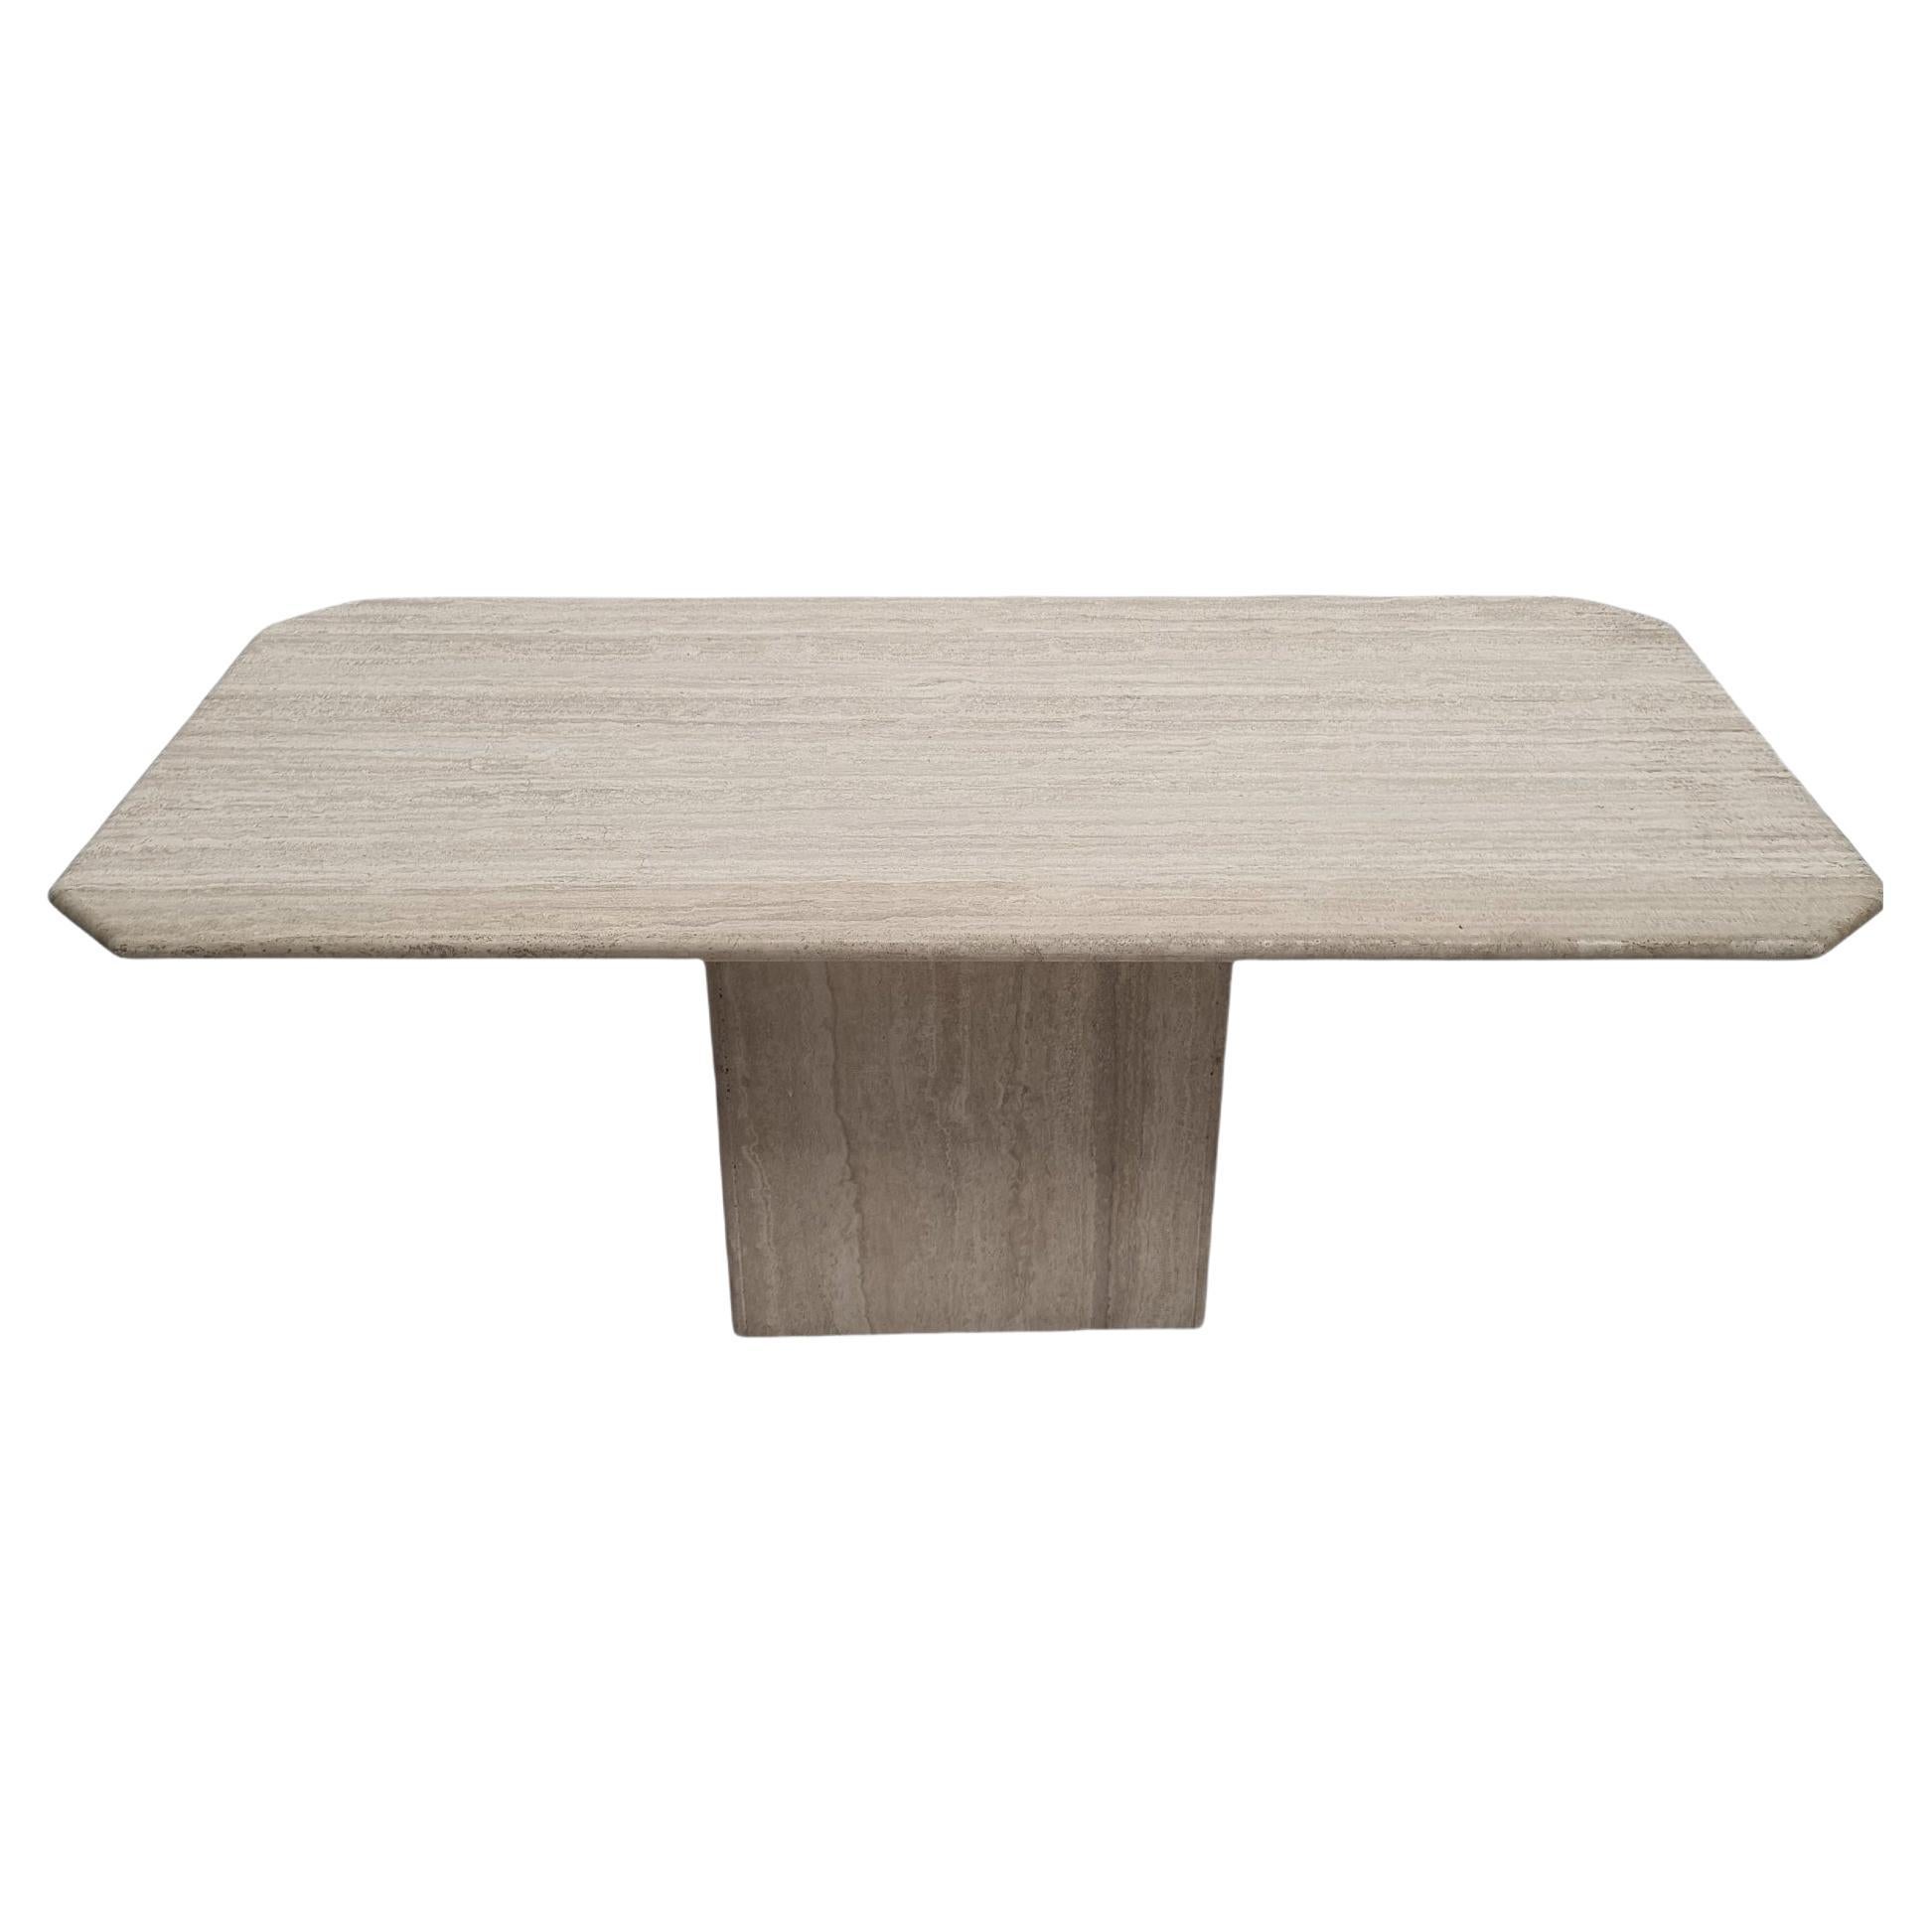 Travertine Dining Table Or Work Desk, 1970s For Sale